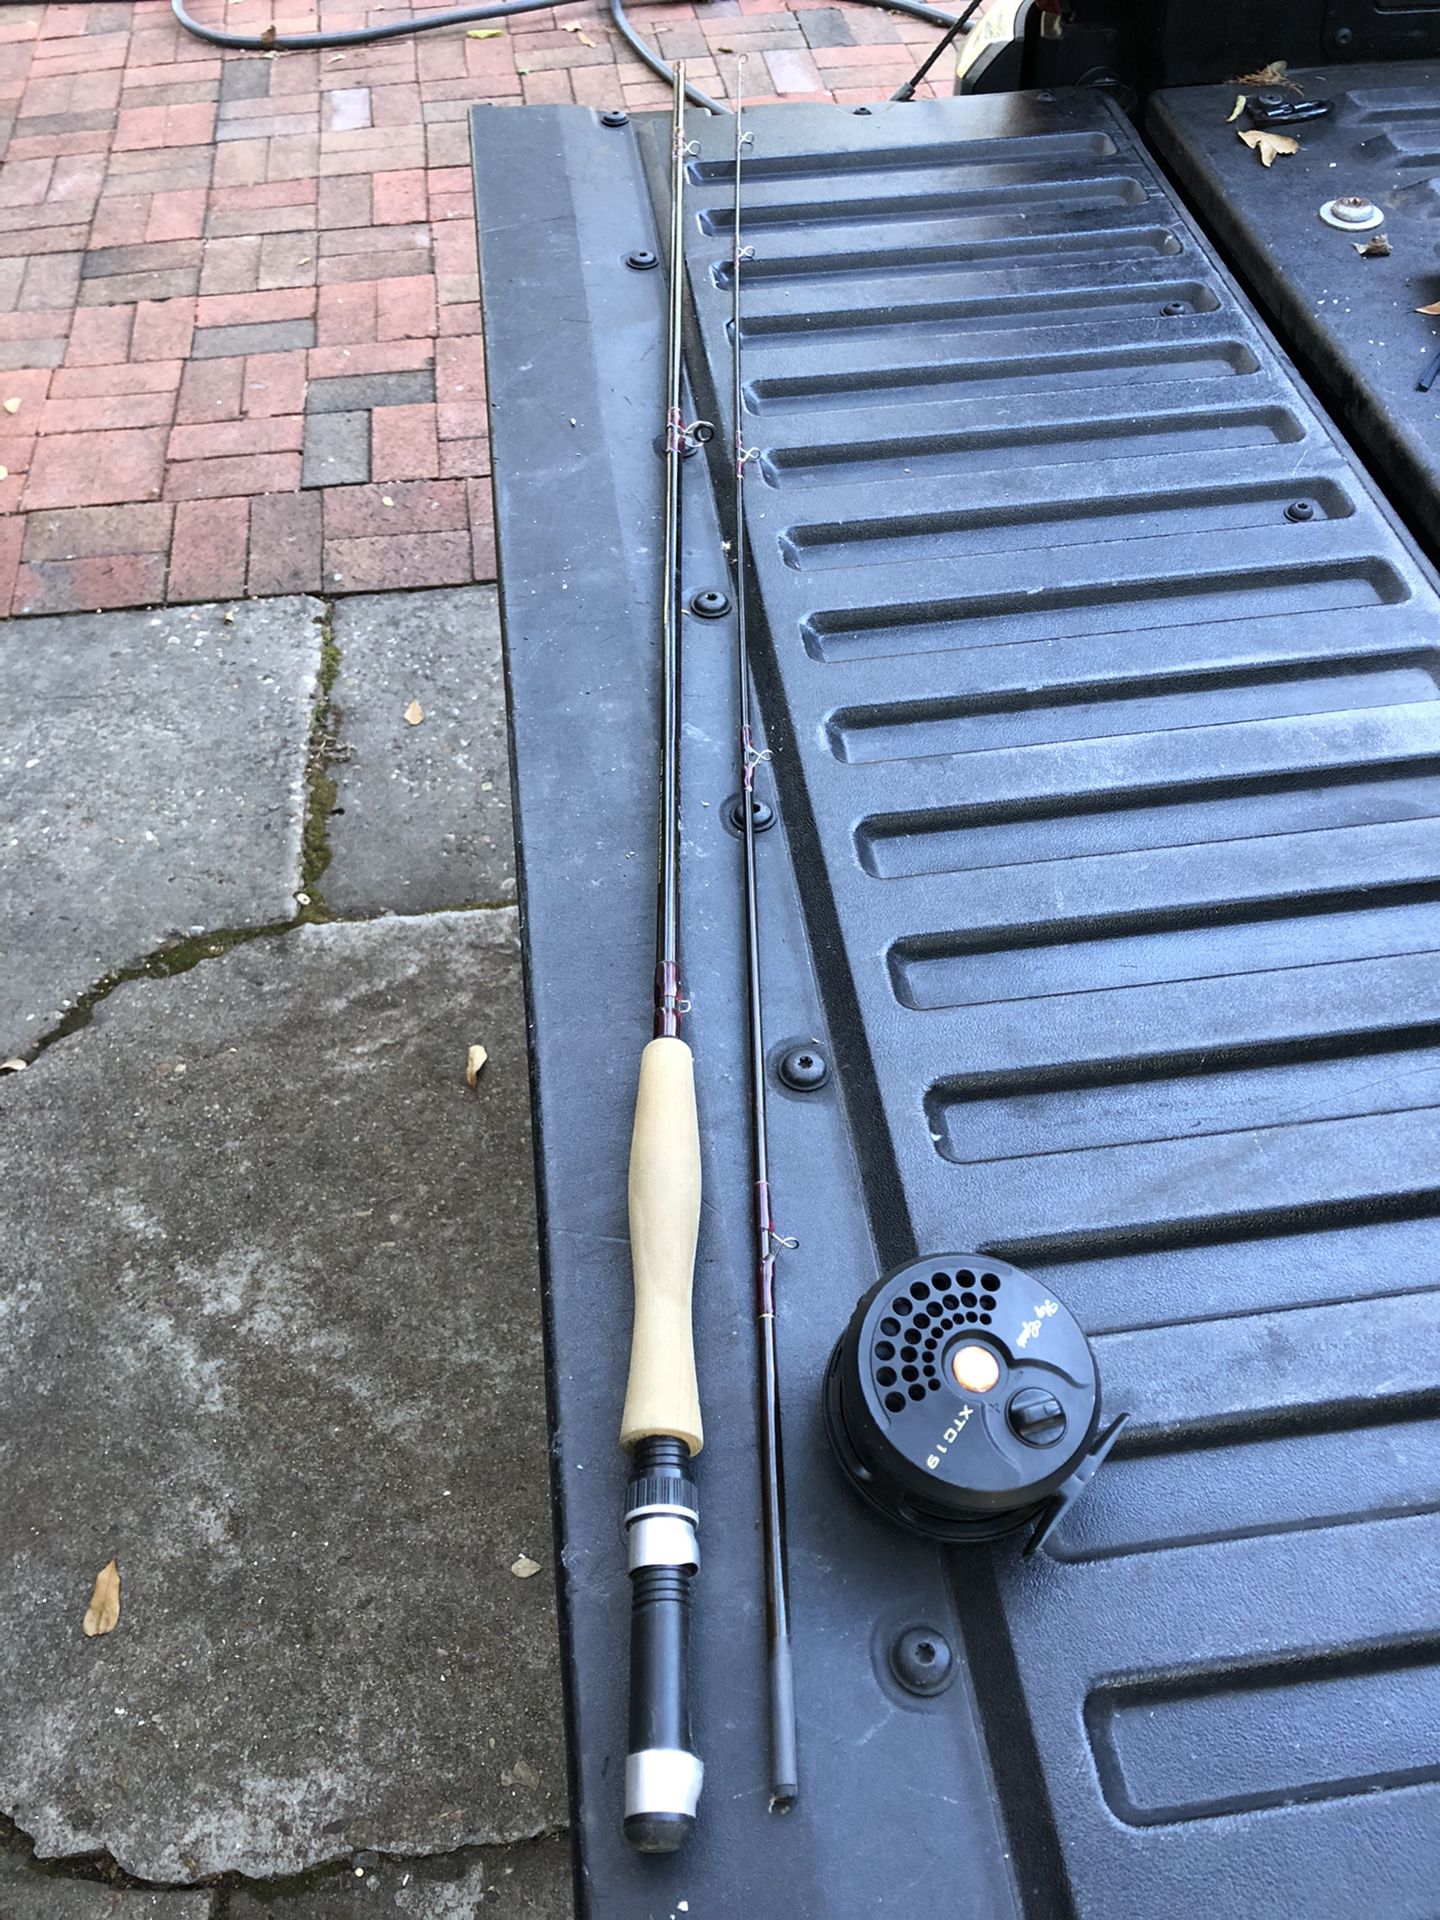 South bend 6wt fly rod 8’ 2 piece with reel